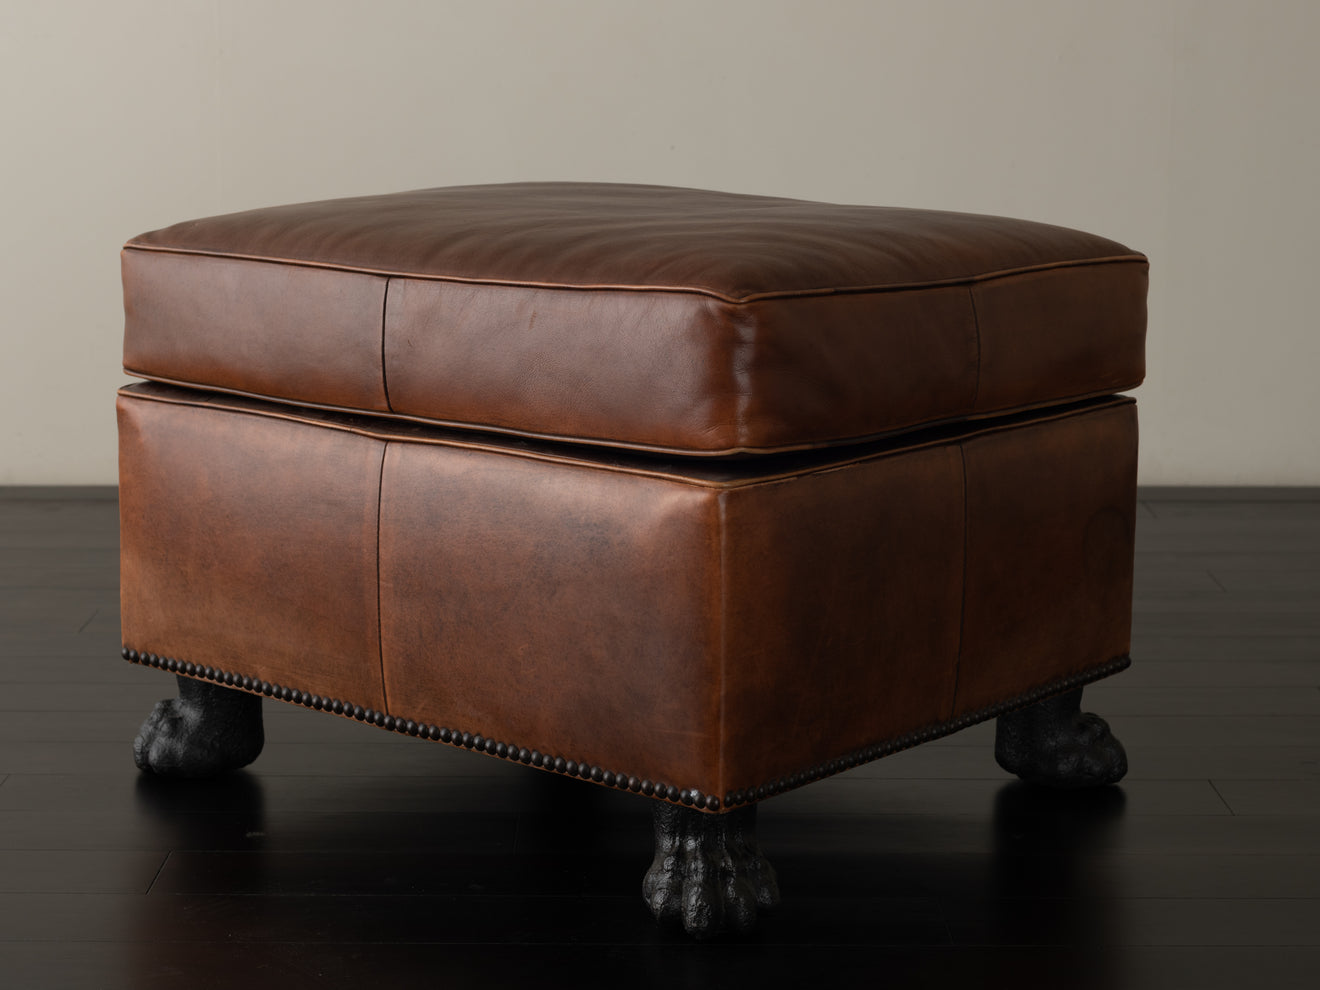 BRONZE FOOTED LEATHER OTTOMAN